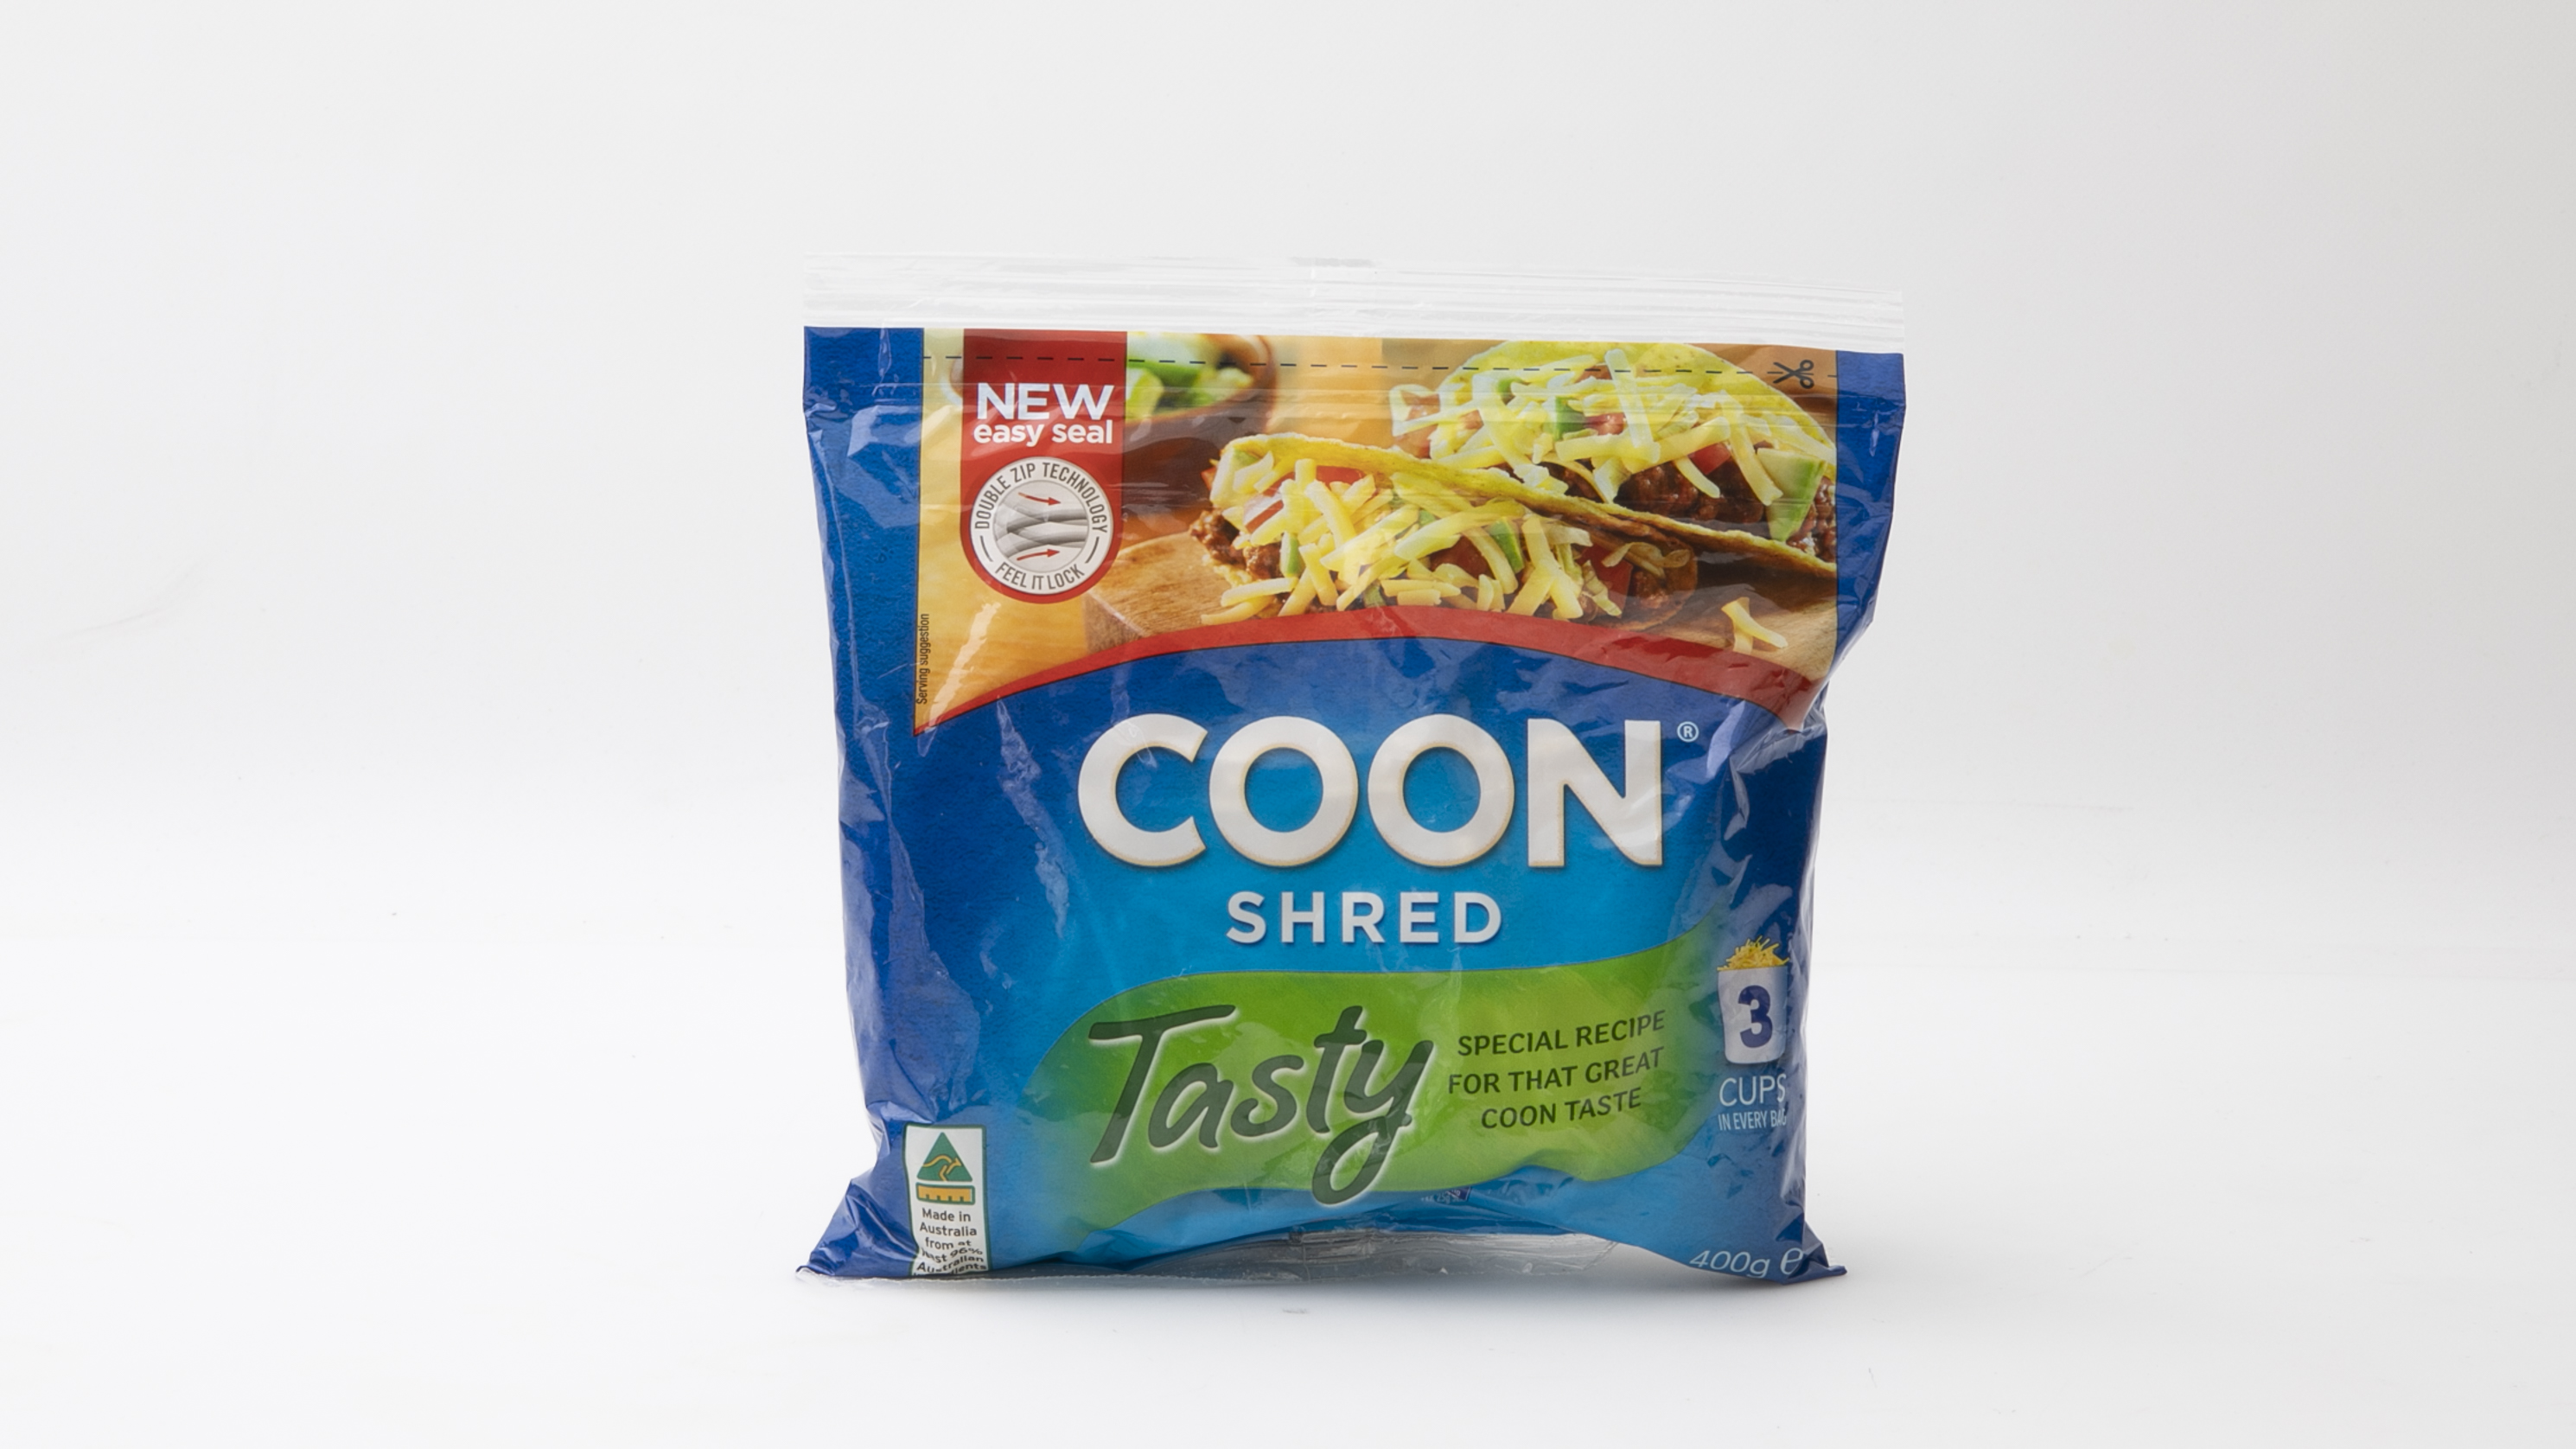 Coon Shred Tasty carousel image